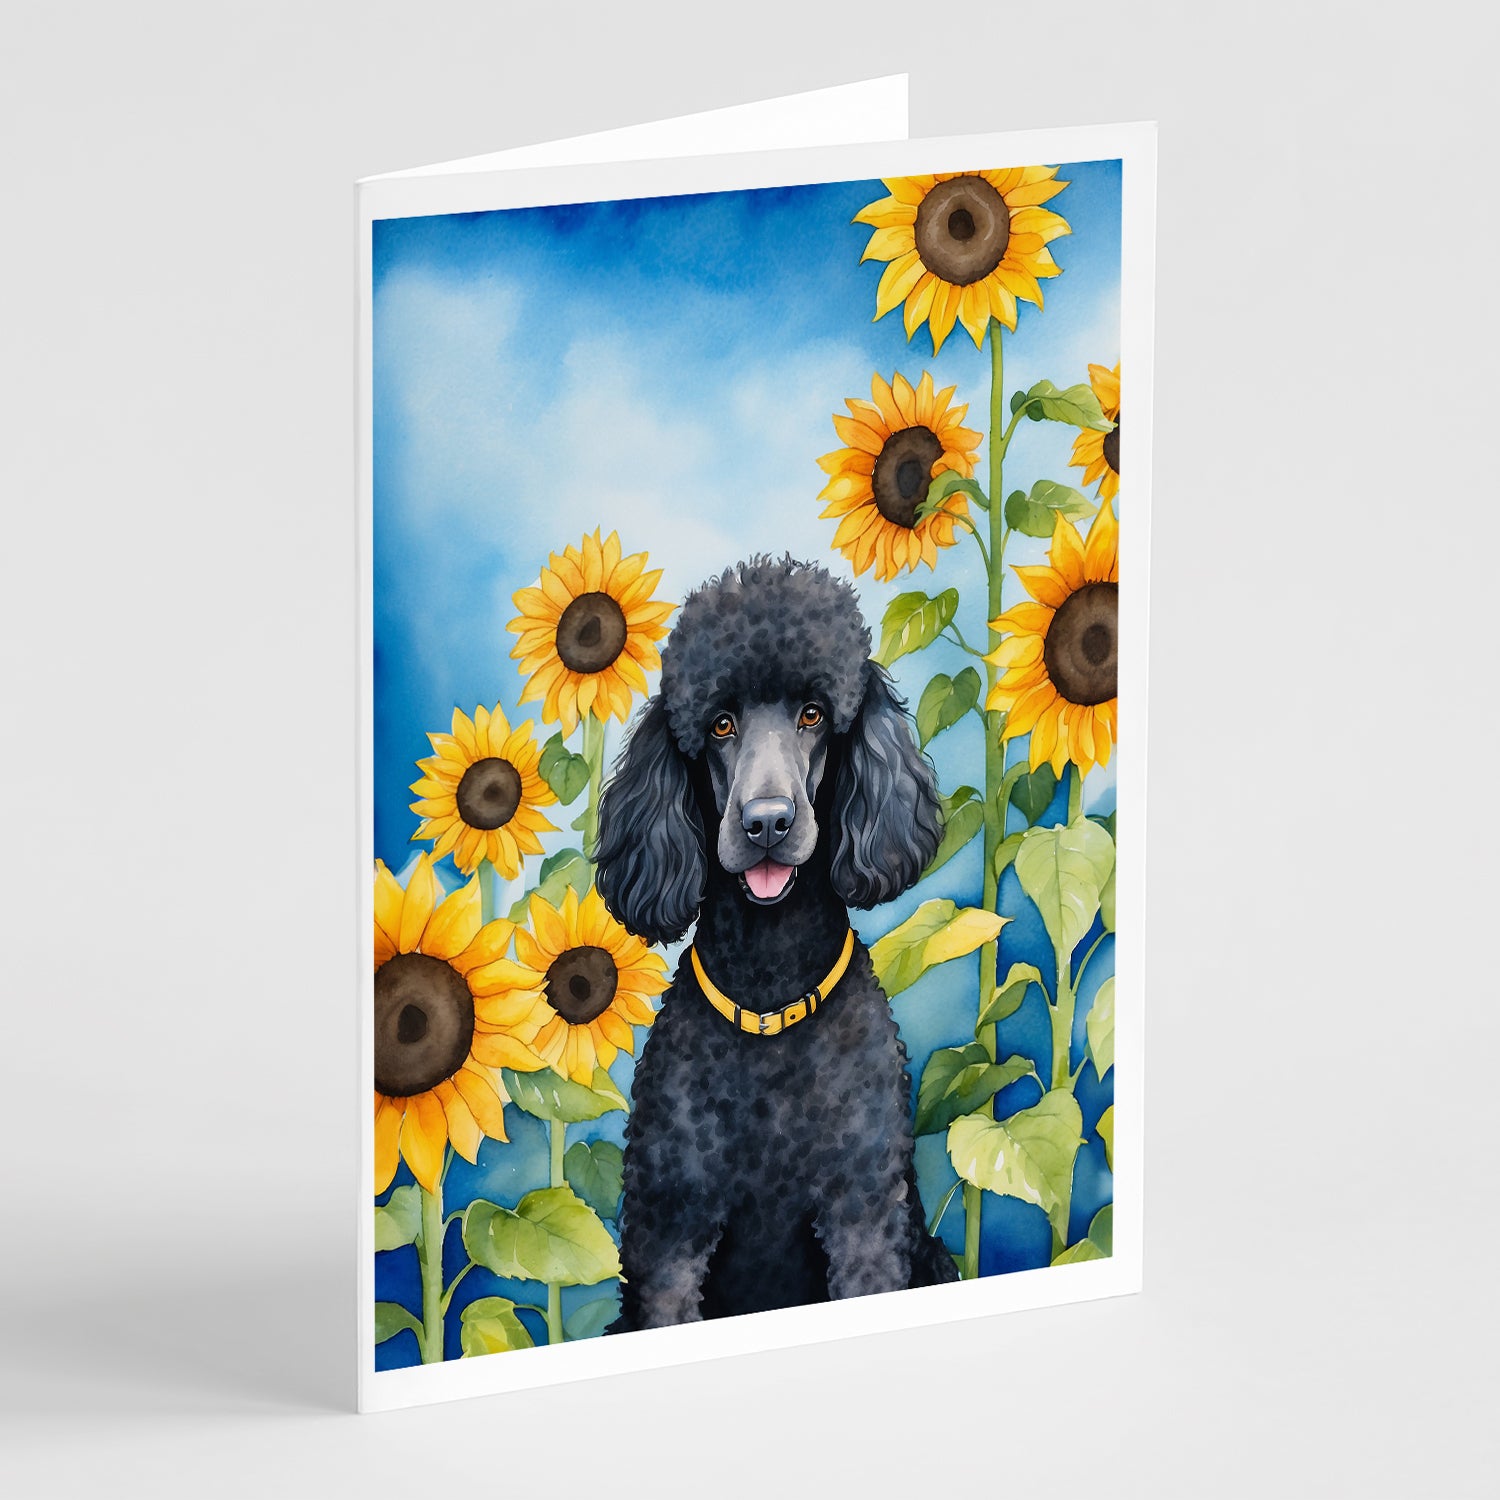 Buy this Black Poodle in Sunflowers Greeting Cards Pack of 8